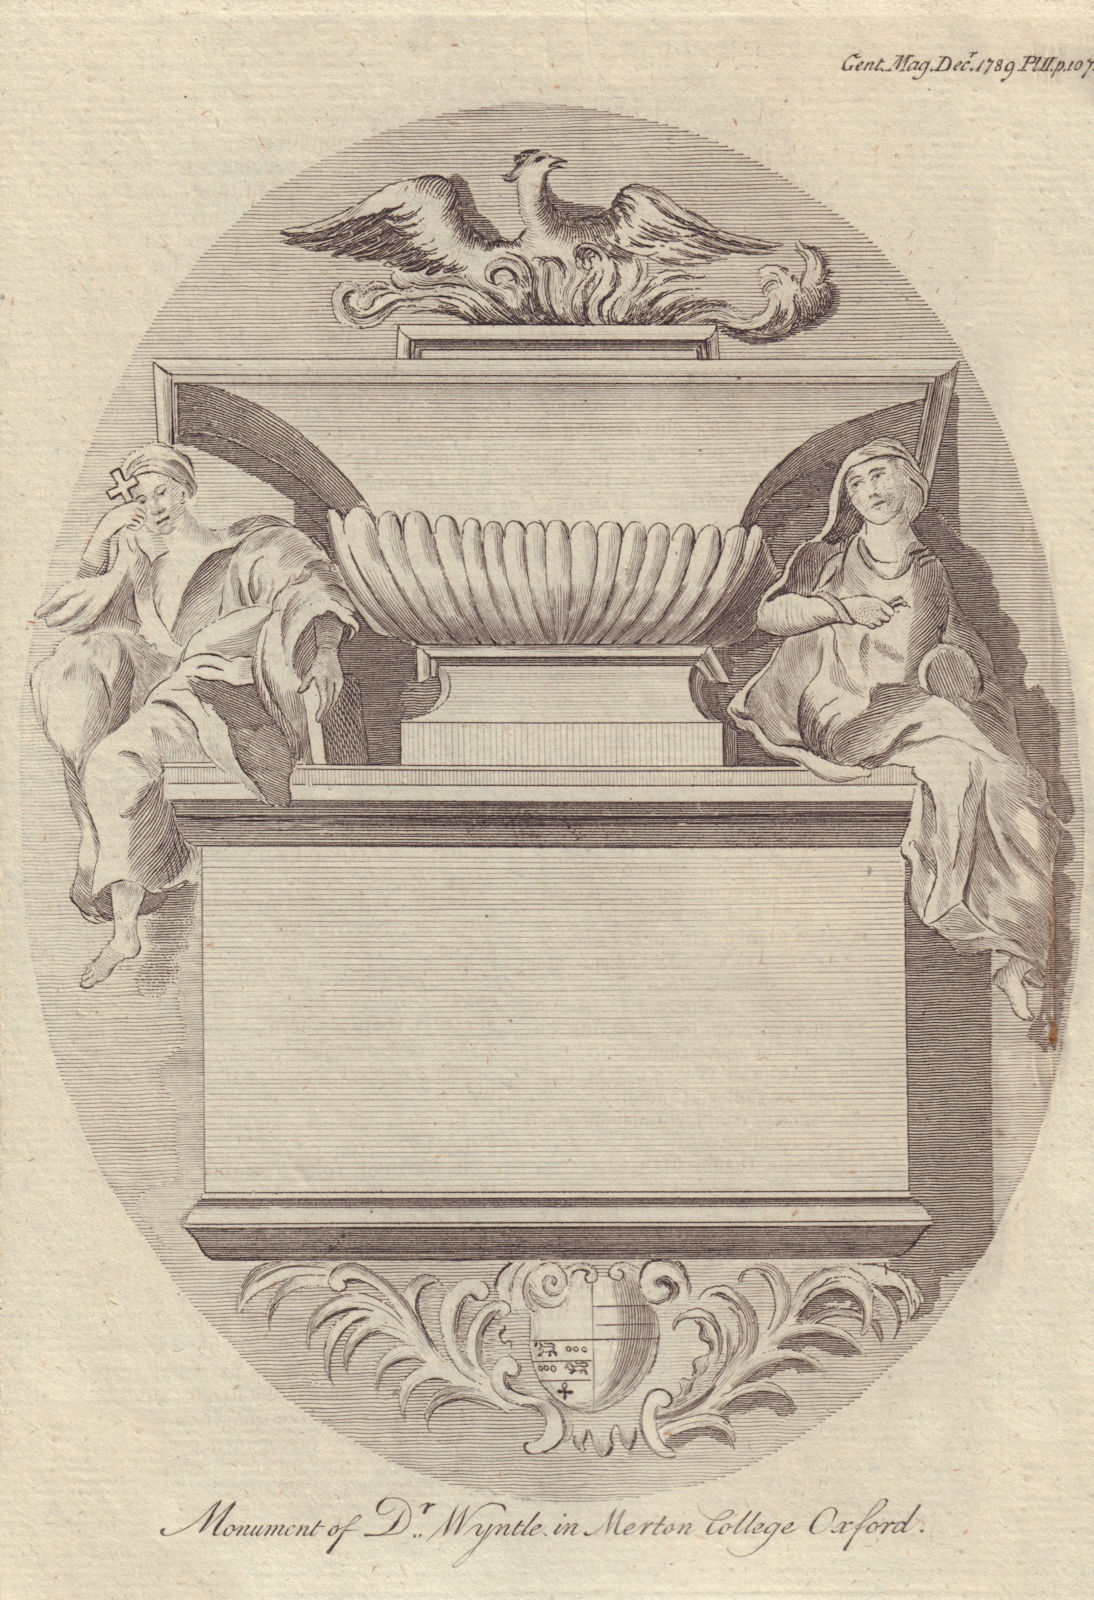 Monument of Dr Wyntle in the Chapel of Merton College Oxford 1789 old print